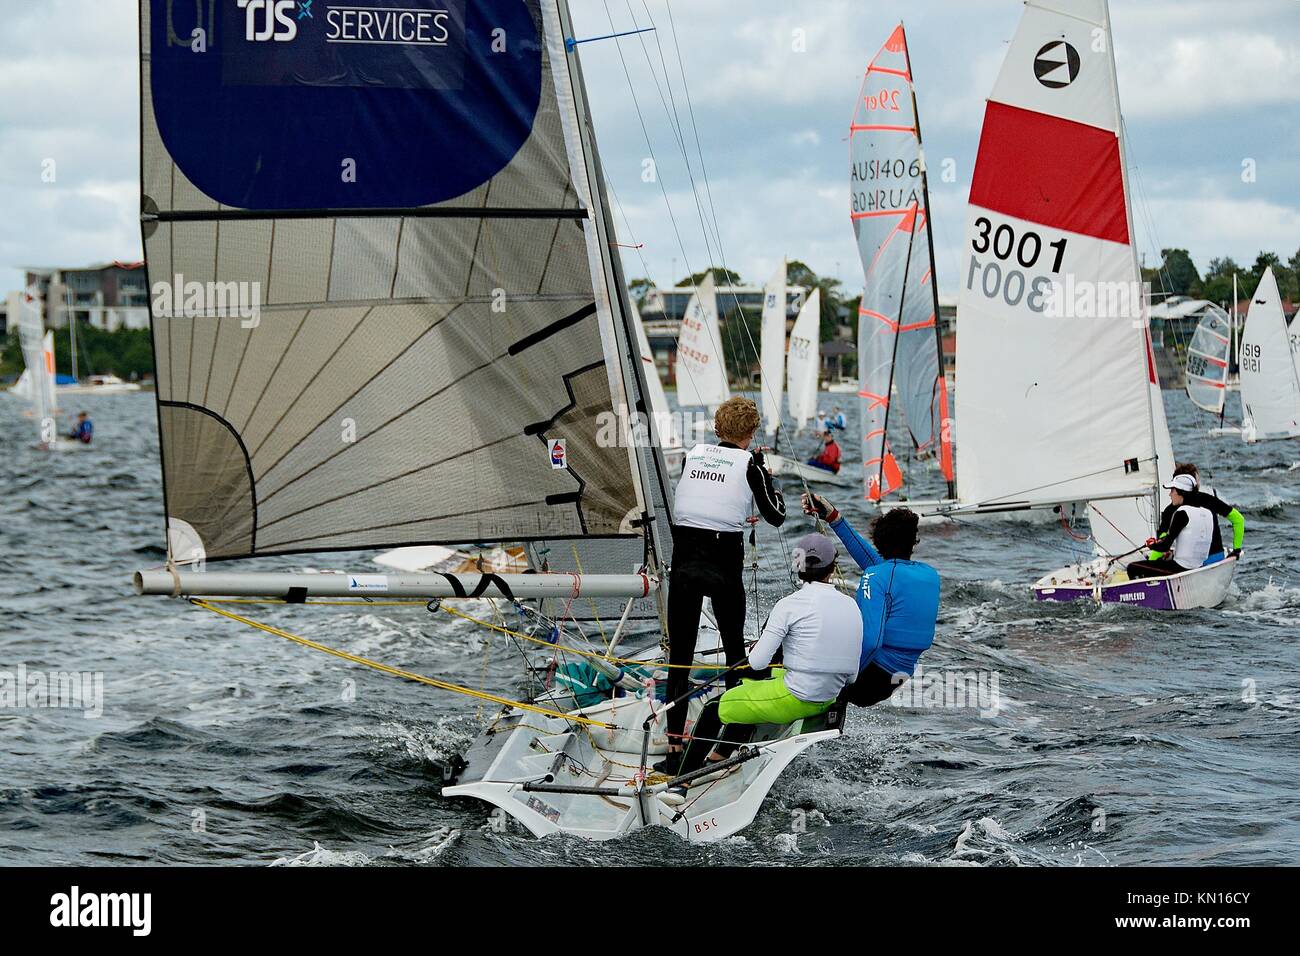 Children competing in the Australian Combined High School Sailing Championships 2013. Lake Macquarie. Australia. Young contestants raced in dinghies. Stock Photo